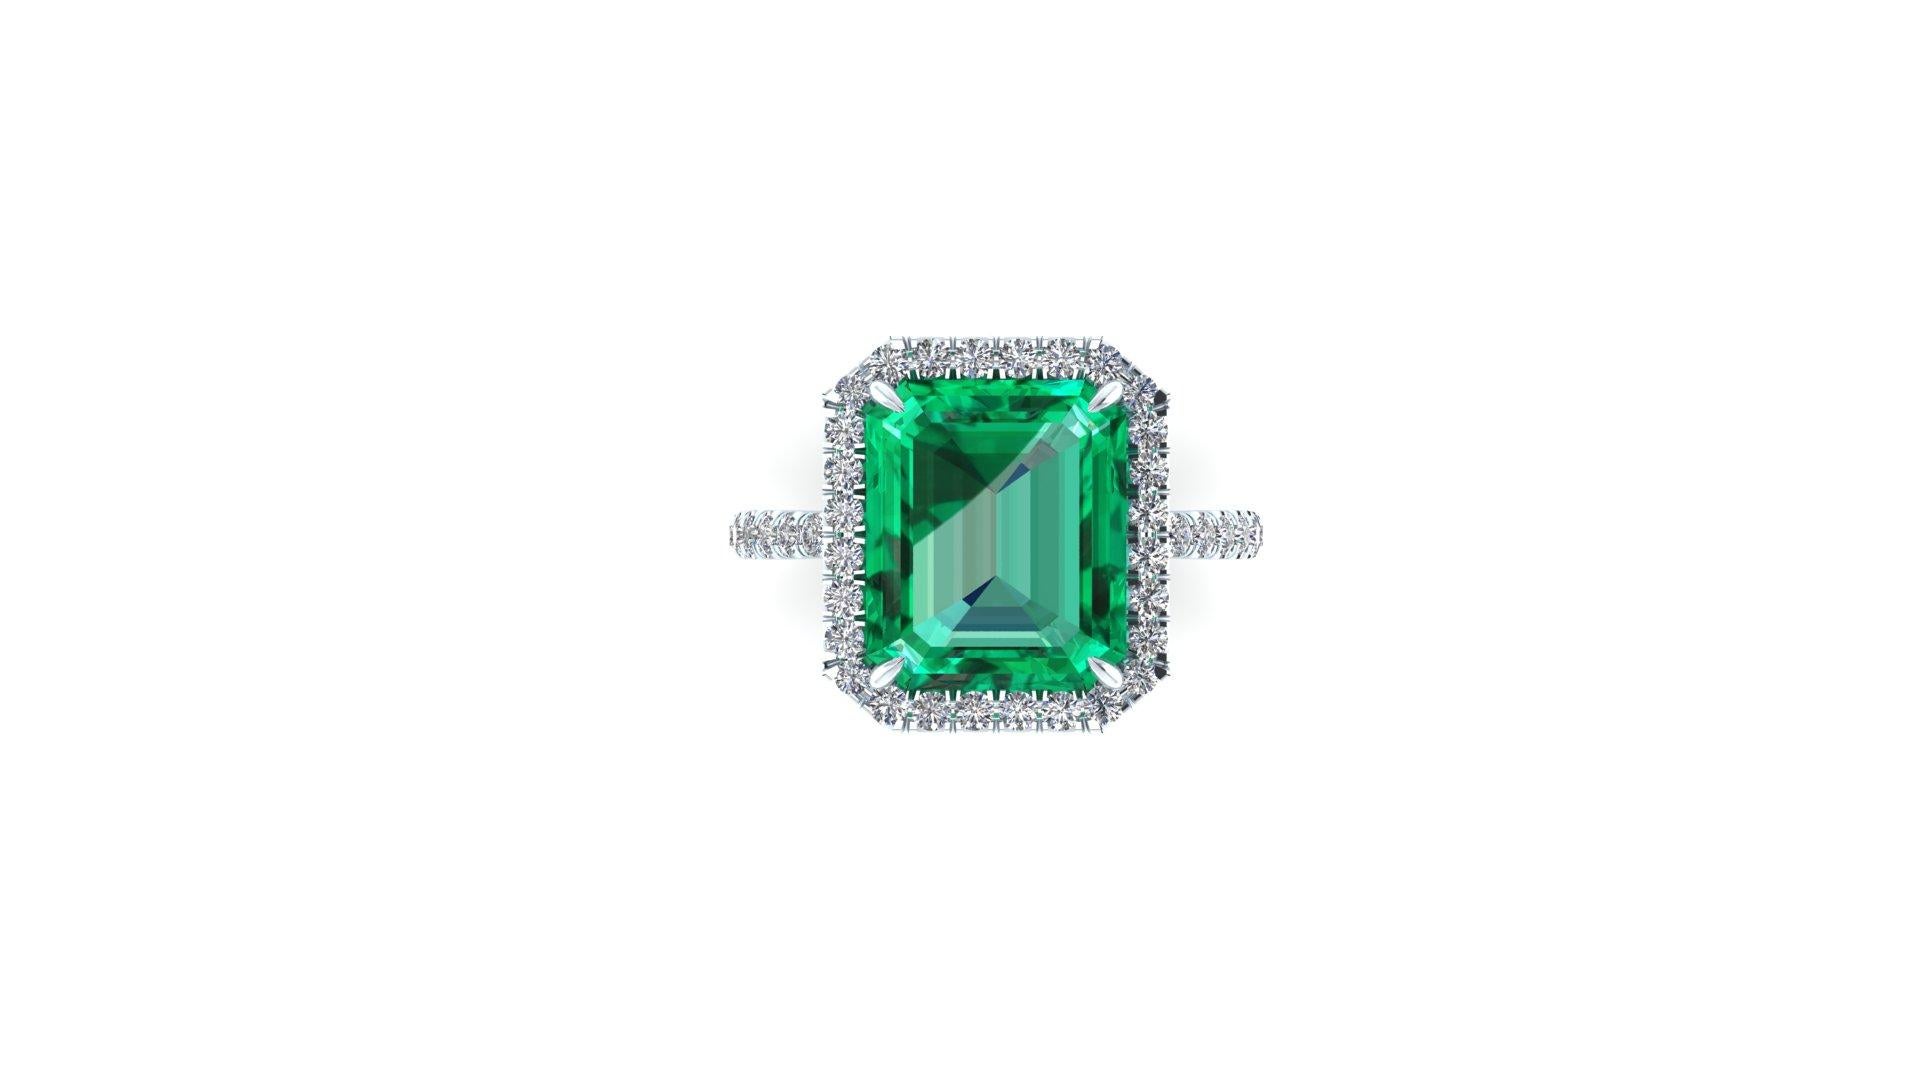 5.75 ct Emerald, GIA Certified stunning clean mineral, with only a few natural inclusions typical of the Emerald. 
Diamond's Halo and Diamond pave' set on the shank, for an approximate total carat weight of 0.65 carats, G color, VS clarity,
made in